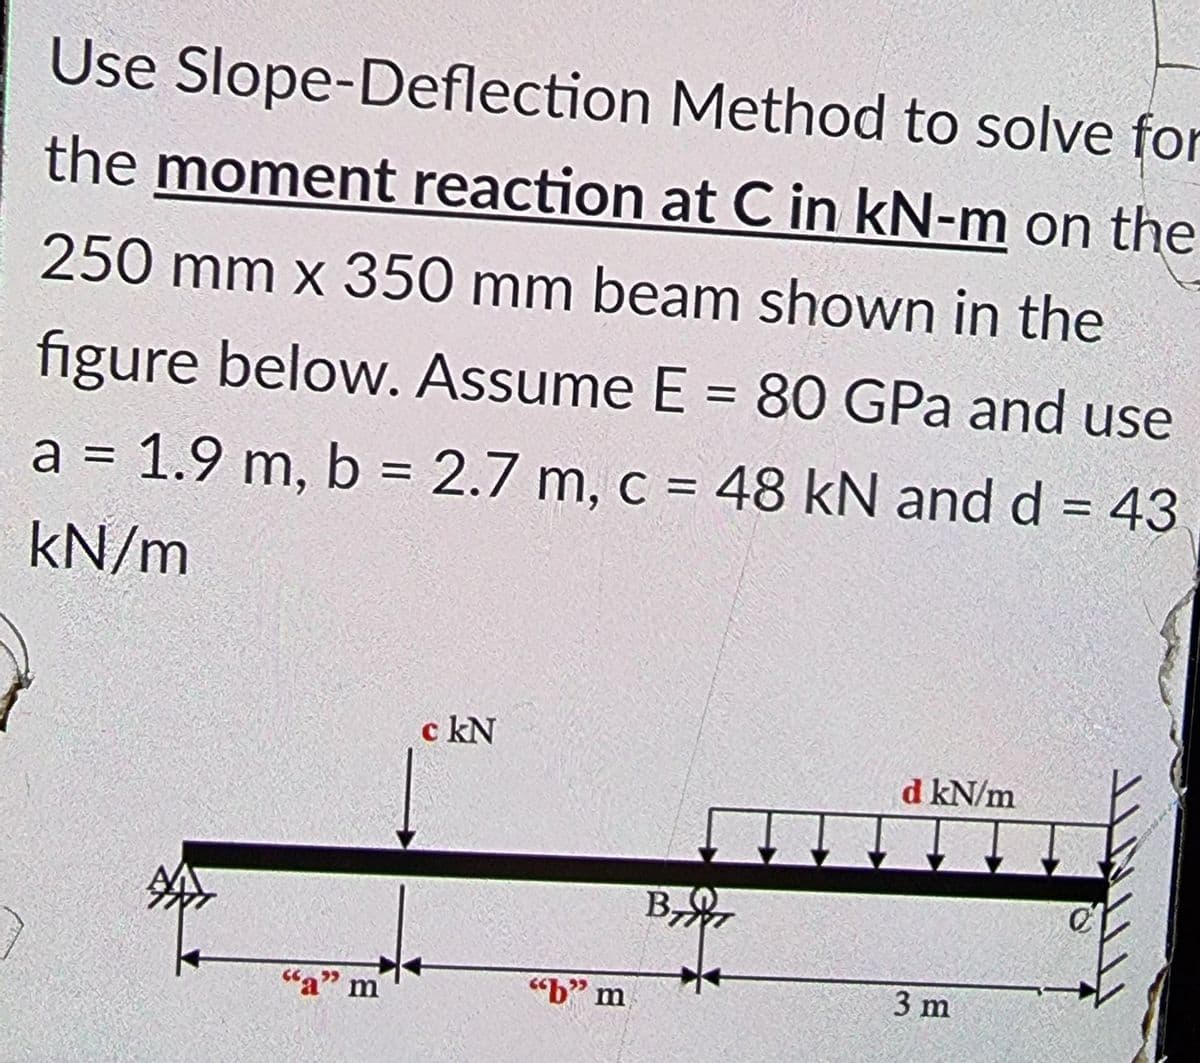 Use Slope-Deflection Method to solve for
the moment reaction at C in kN-m on the
250 mm x 350 mm beam shown in the
figure below. Assume E = 80 GPa and use
a = 1.9 m, b = 2.7 m, c = 48 kN and d = 43
%3D
kN/m
c kN
d kN/m
B
,
"a" m
"b" m
3 m
